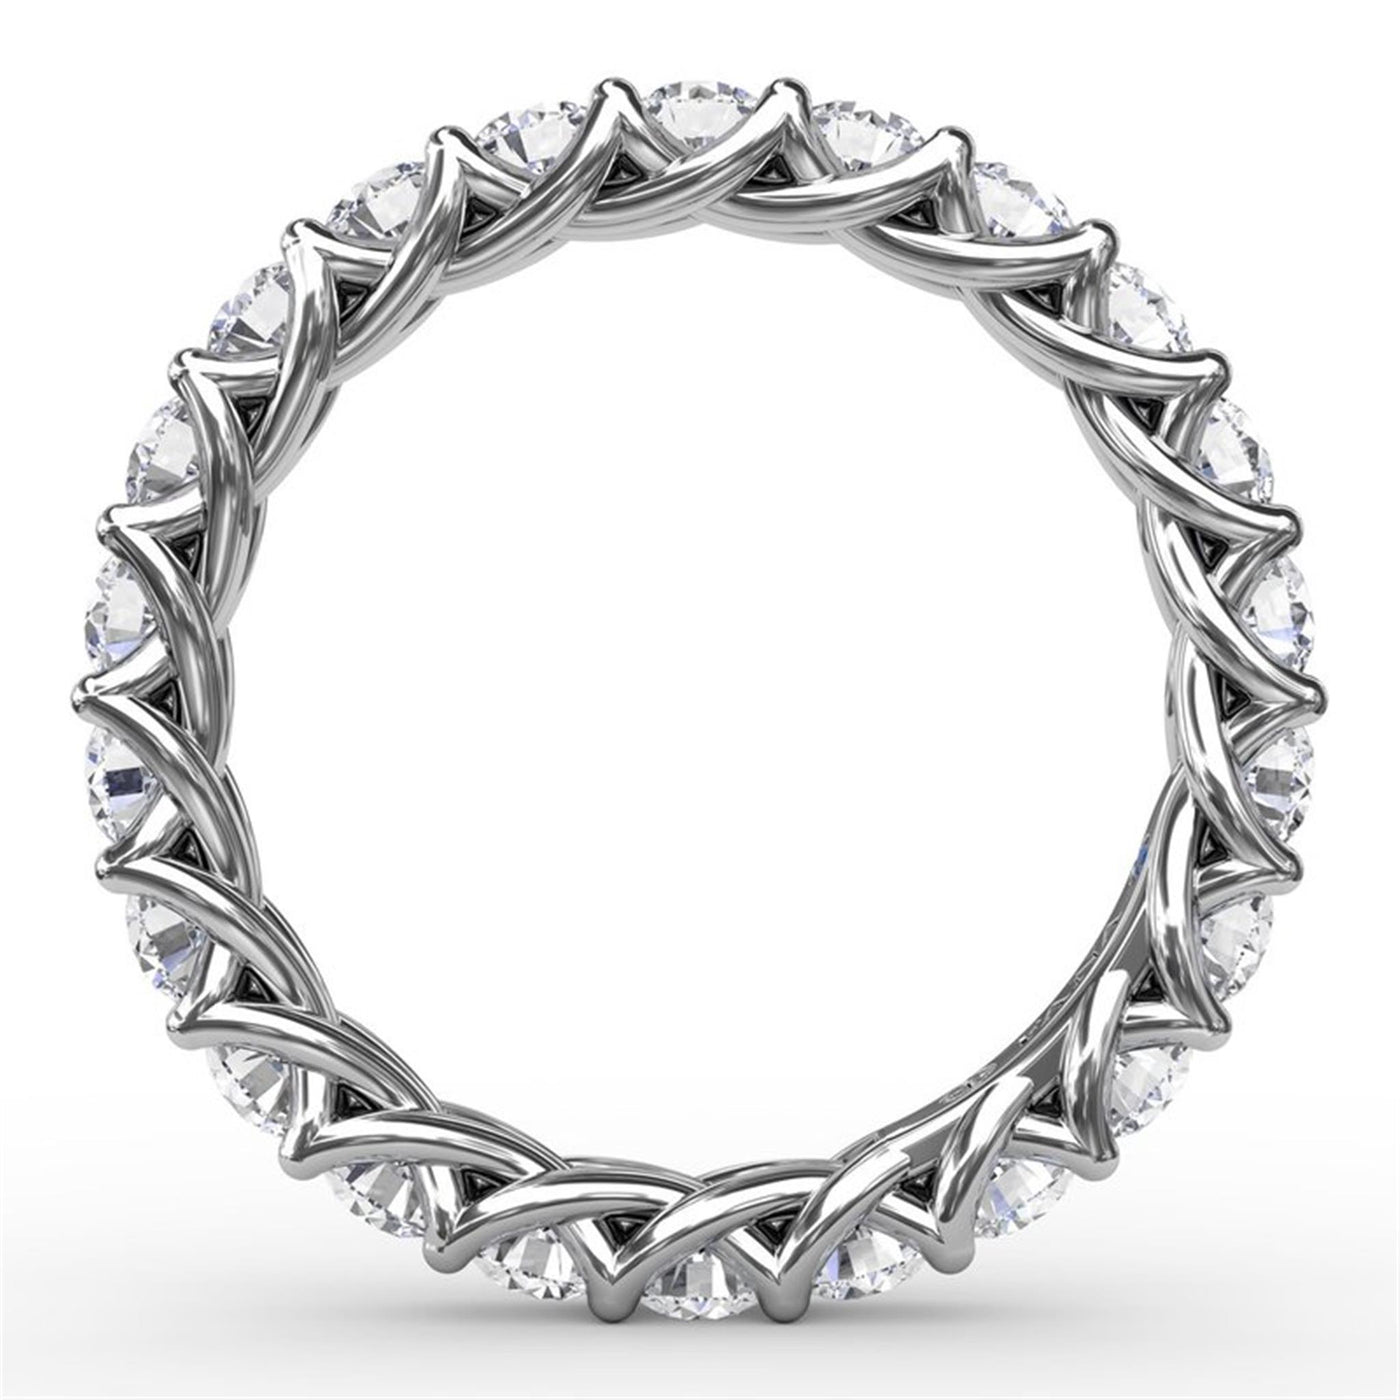 14K White Gold 1.98ctw Diamond Eternity Band 
Featuring a Polished Finish